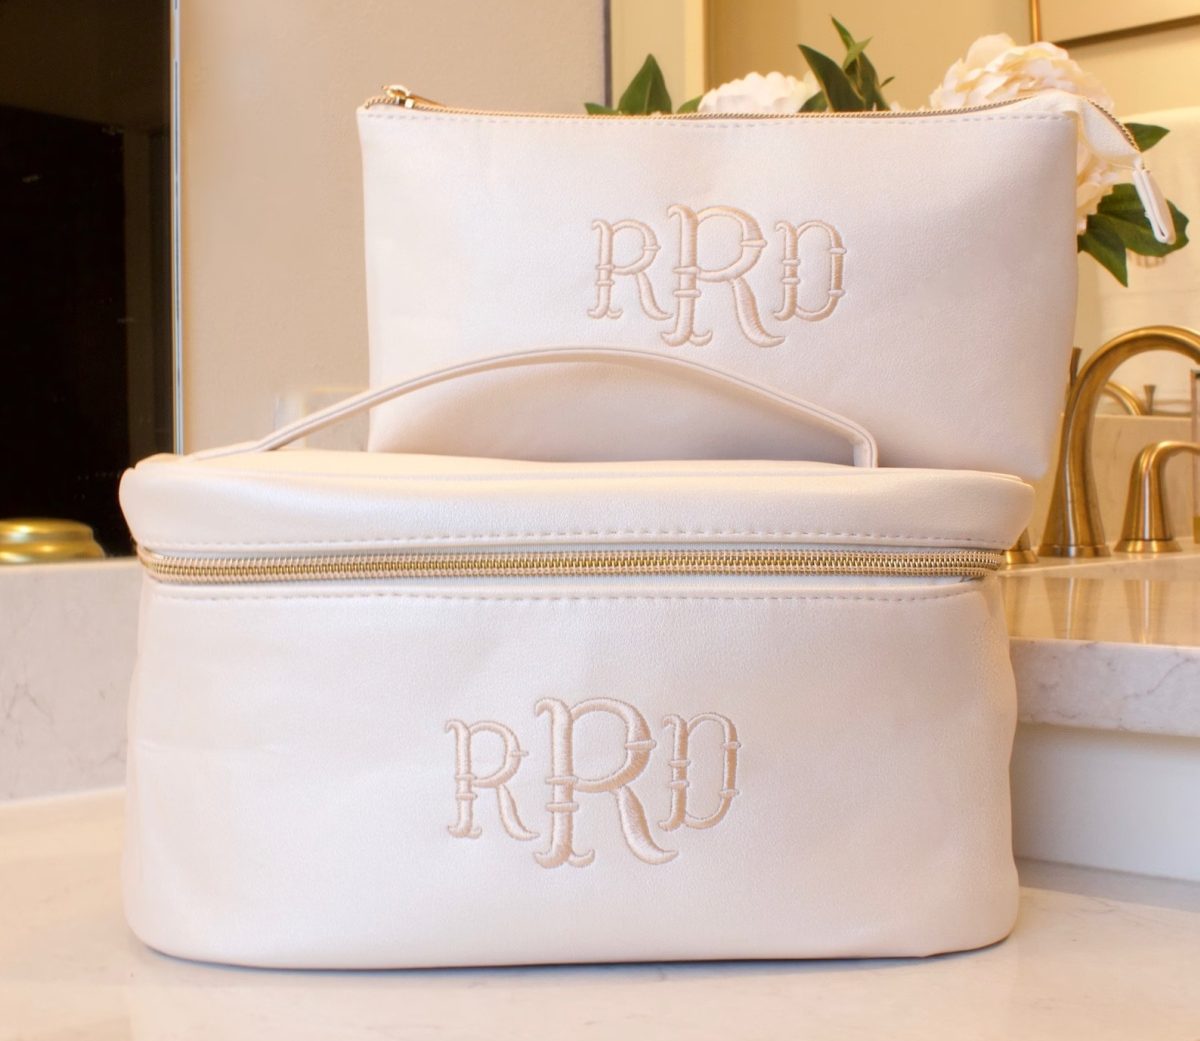 This Personalized Makeup Case with handle makes a cute bridal shower gift